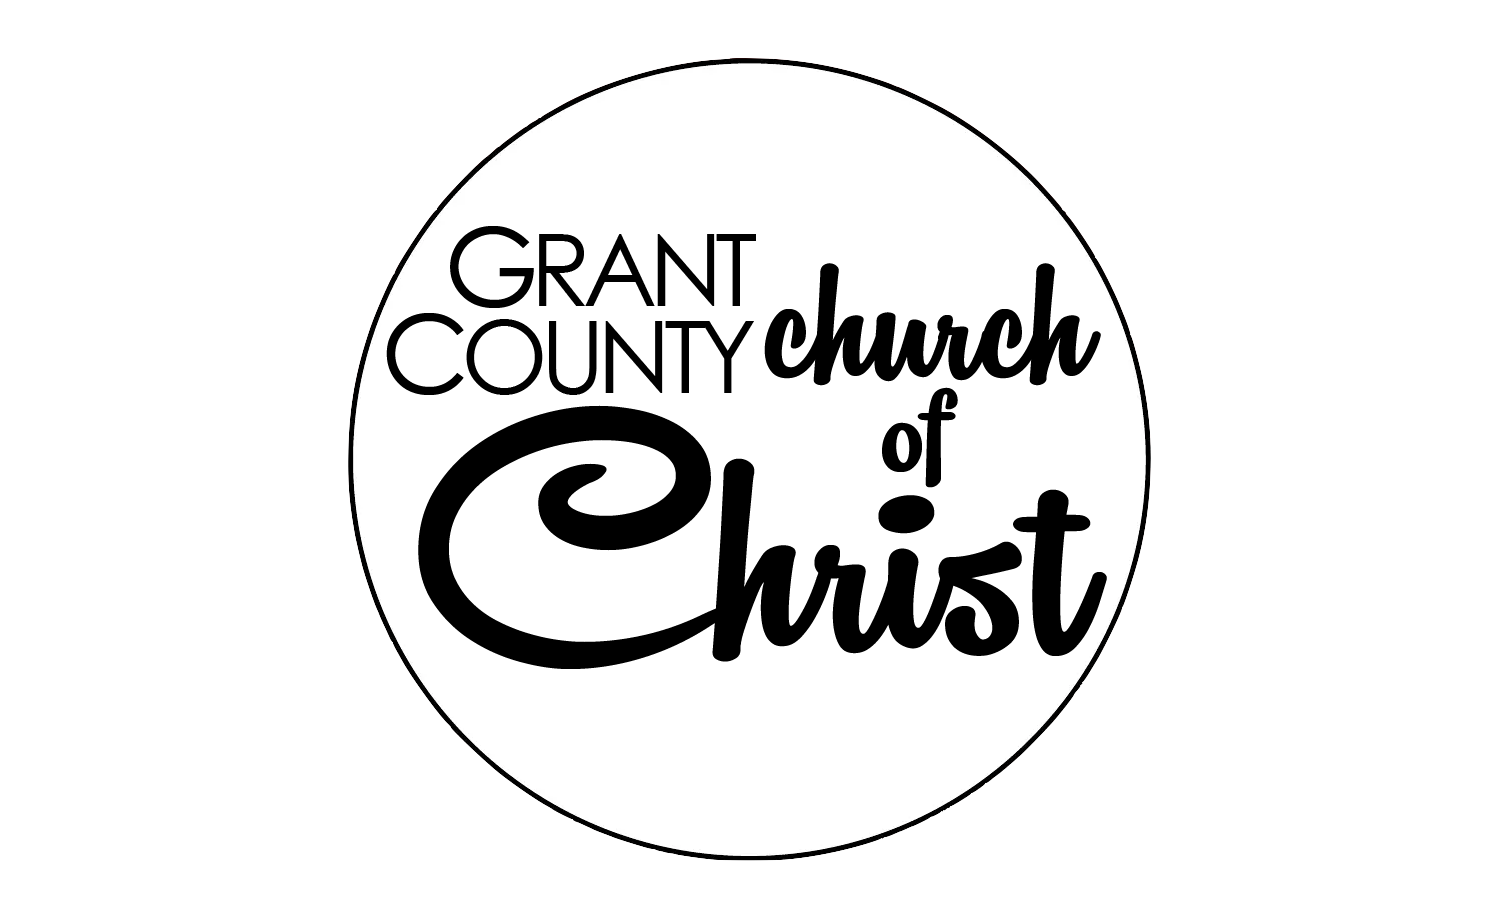 Grant County Church of Christ